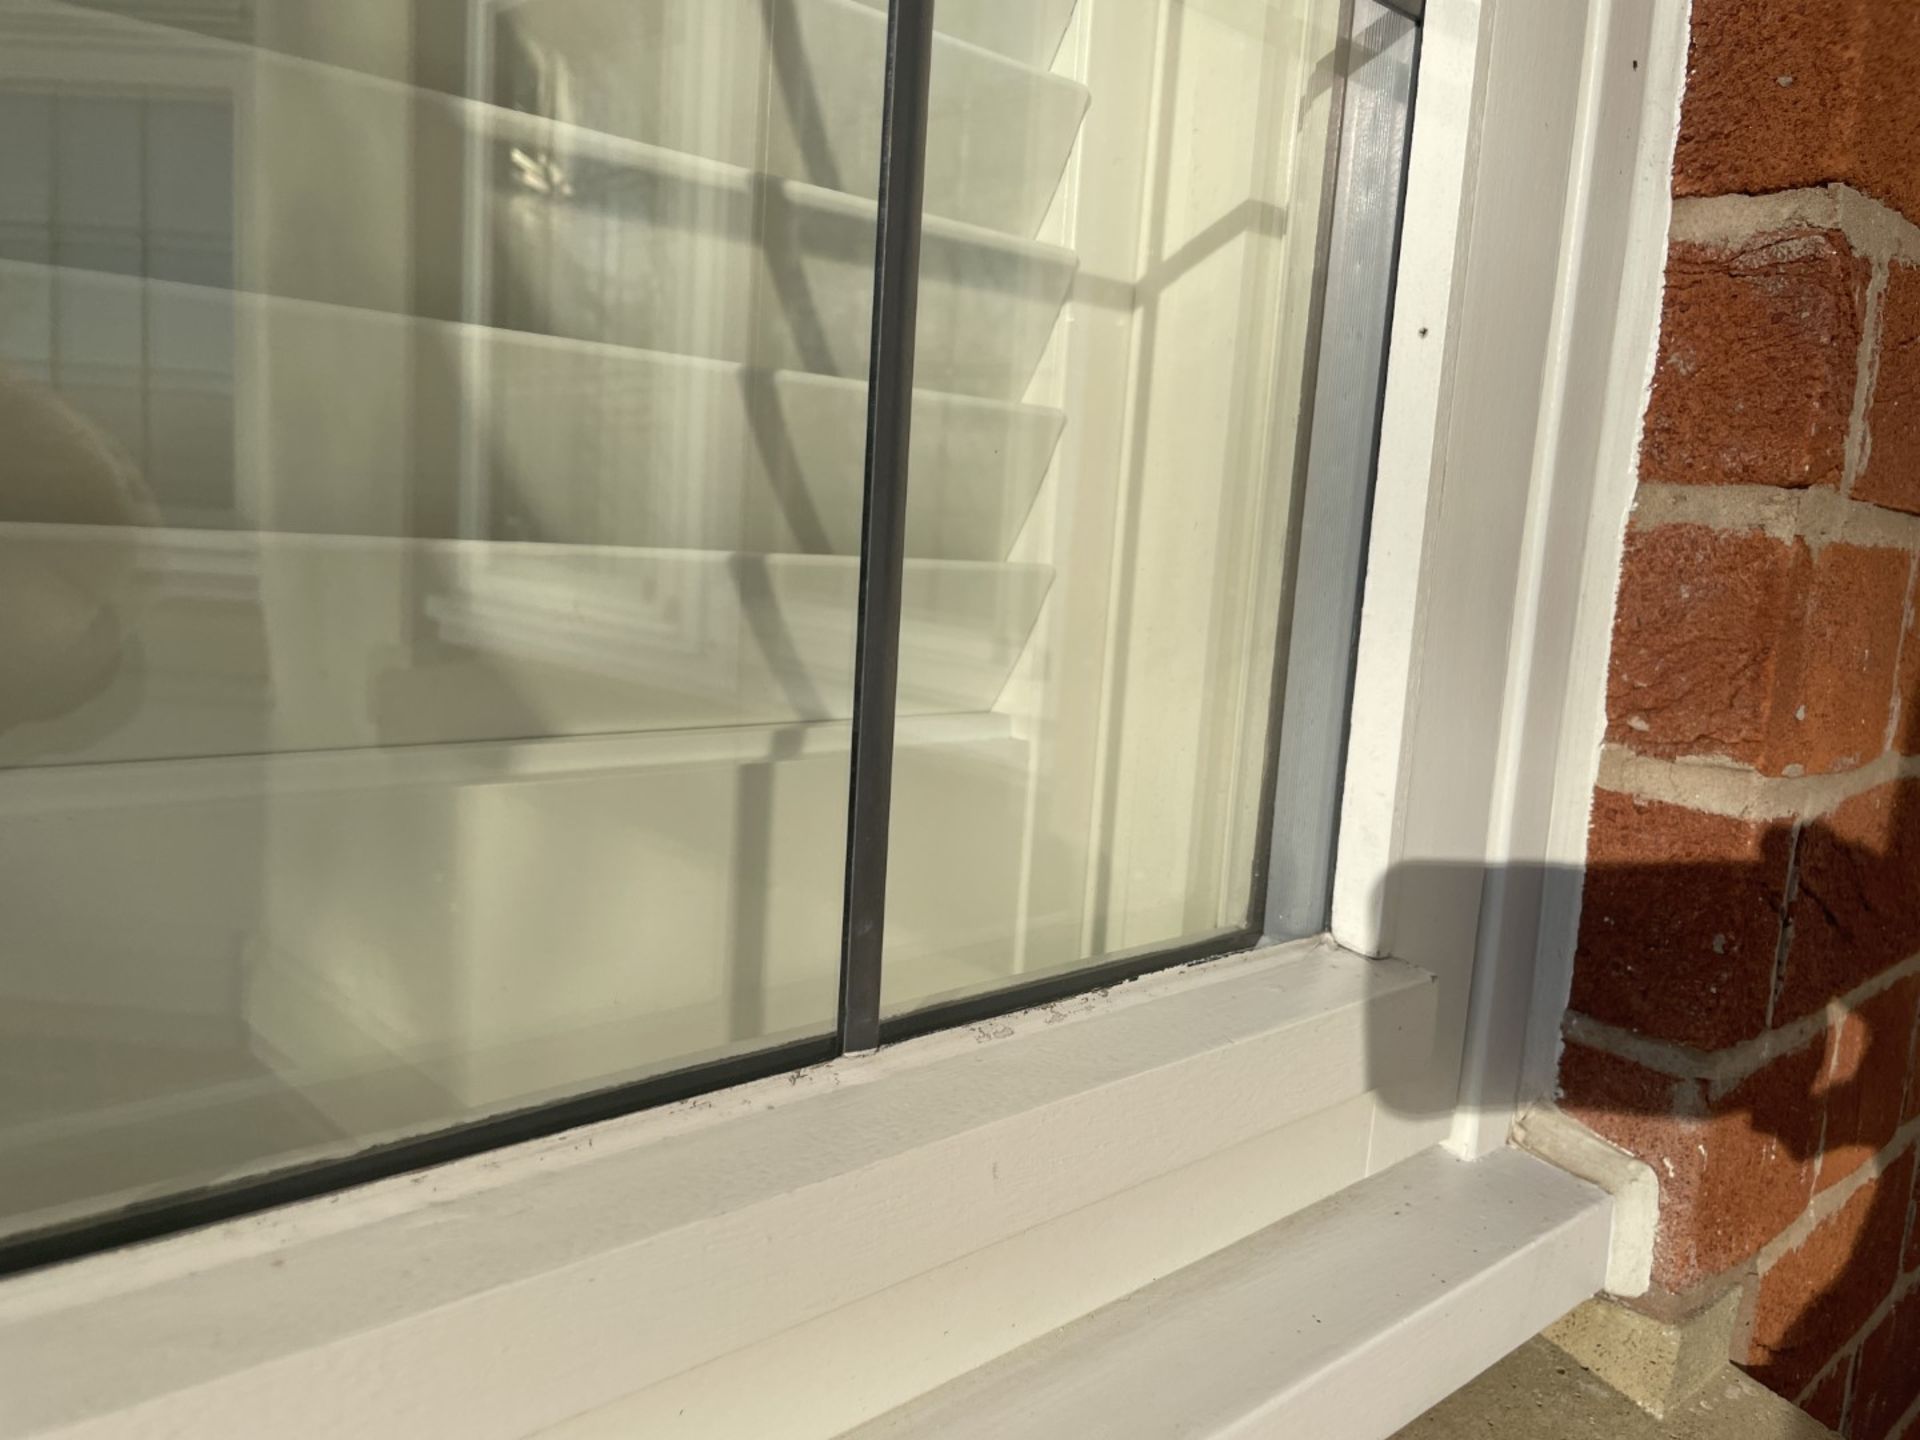 1 x Hardwood Timber Double Glazed Window Frames fitted with Shutter Blinds, In White - Ref: PAN106 - Image 22 of 23